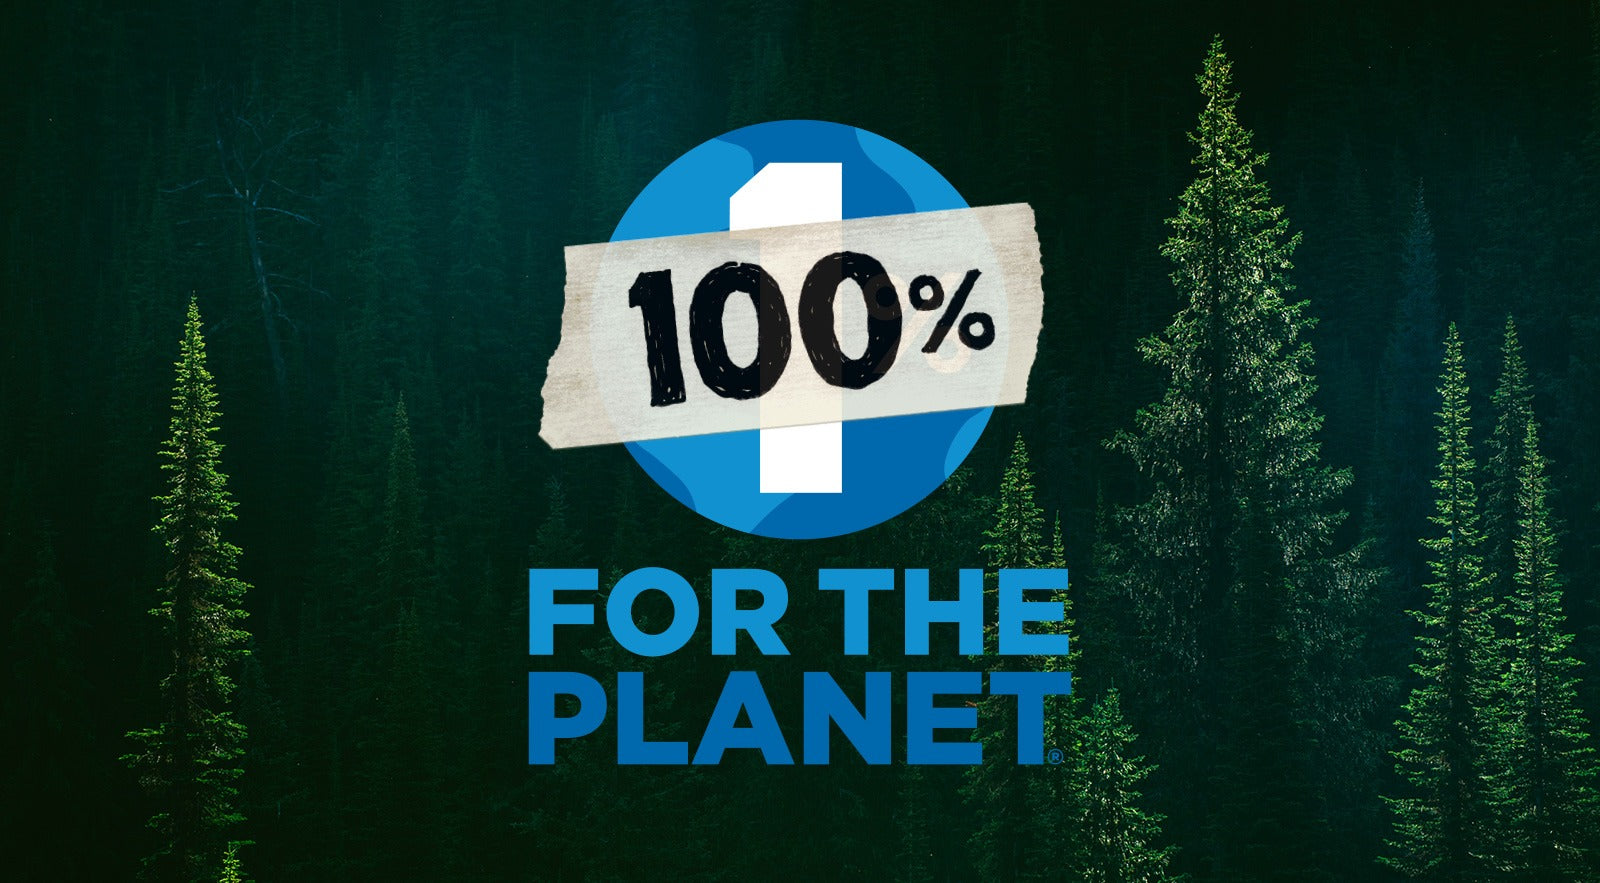 100% for the planet text over illustration of the earth and pine trees from patagonia